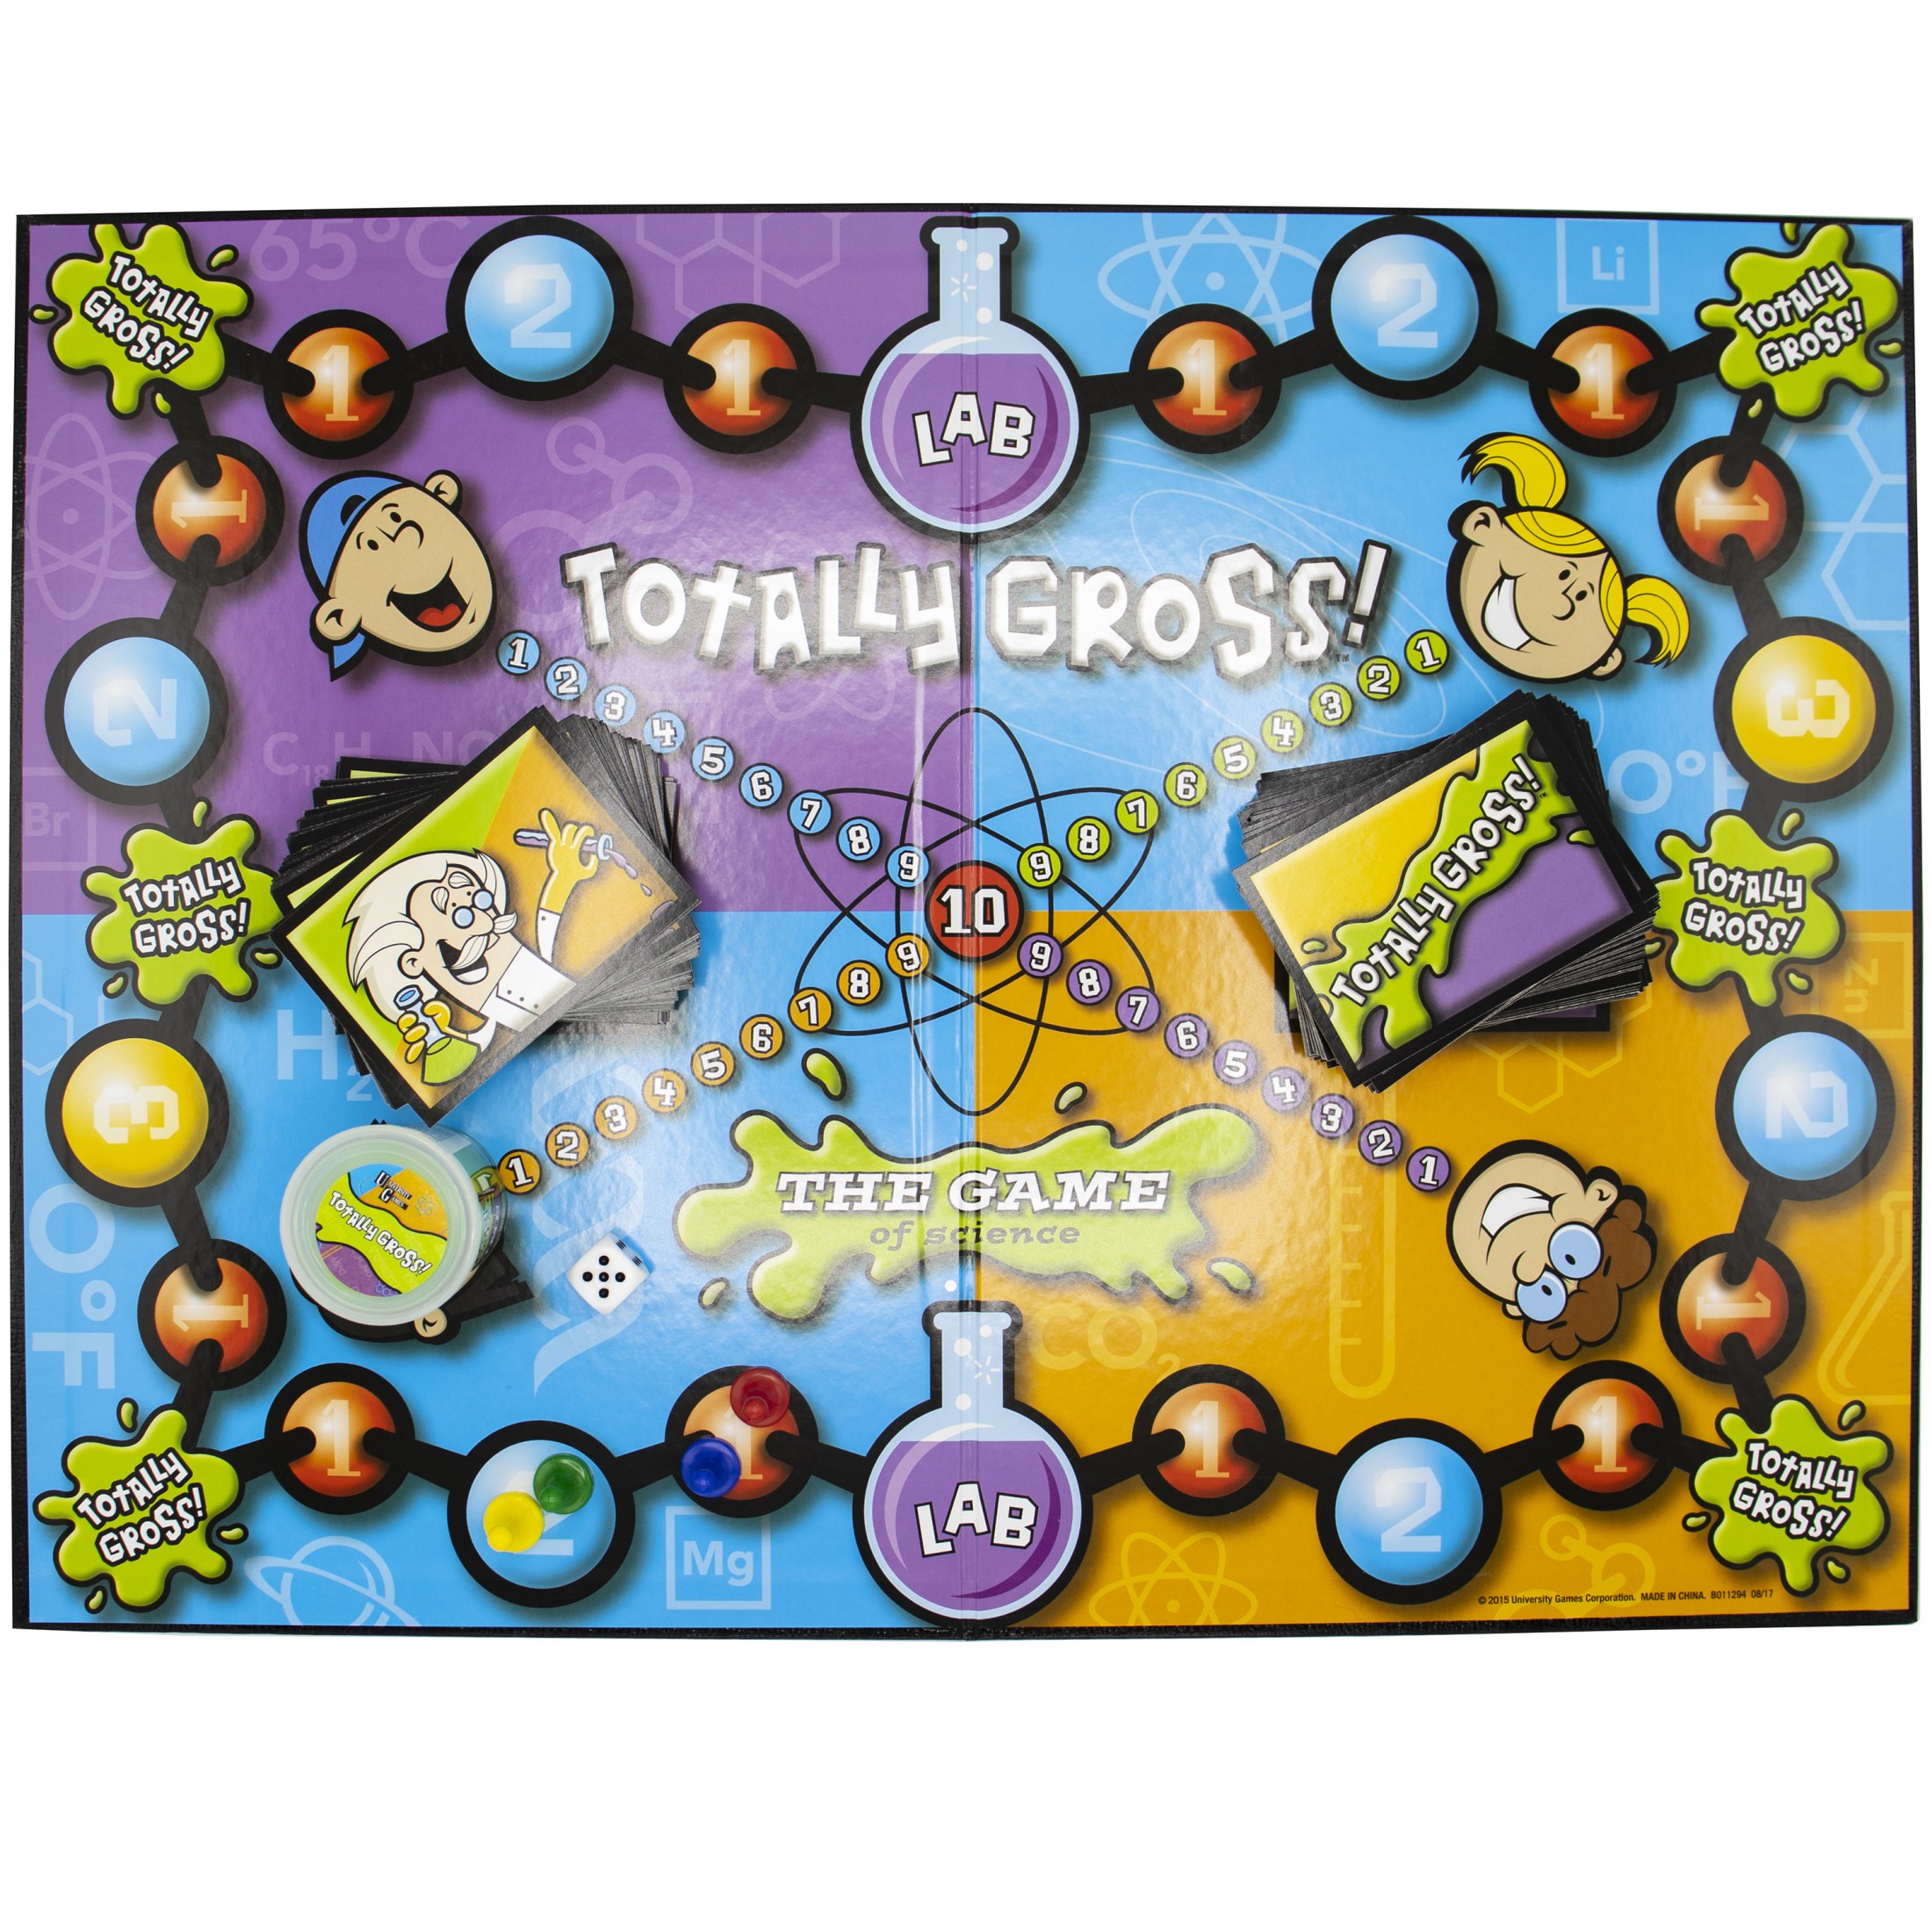 University Games | Totally Gross: The Game of Science - image 3 of 6